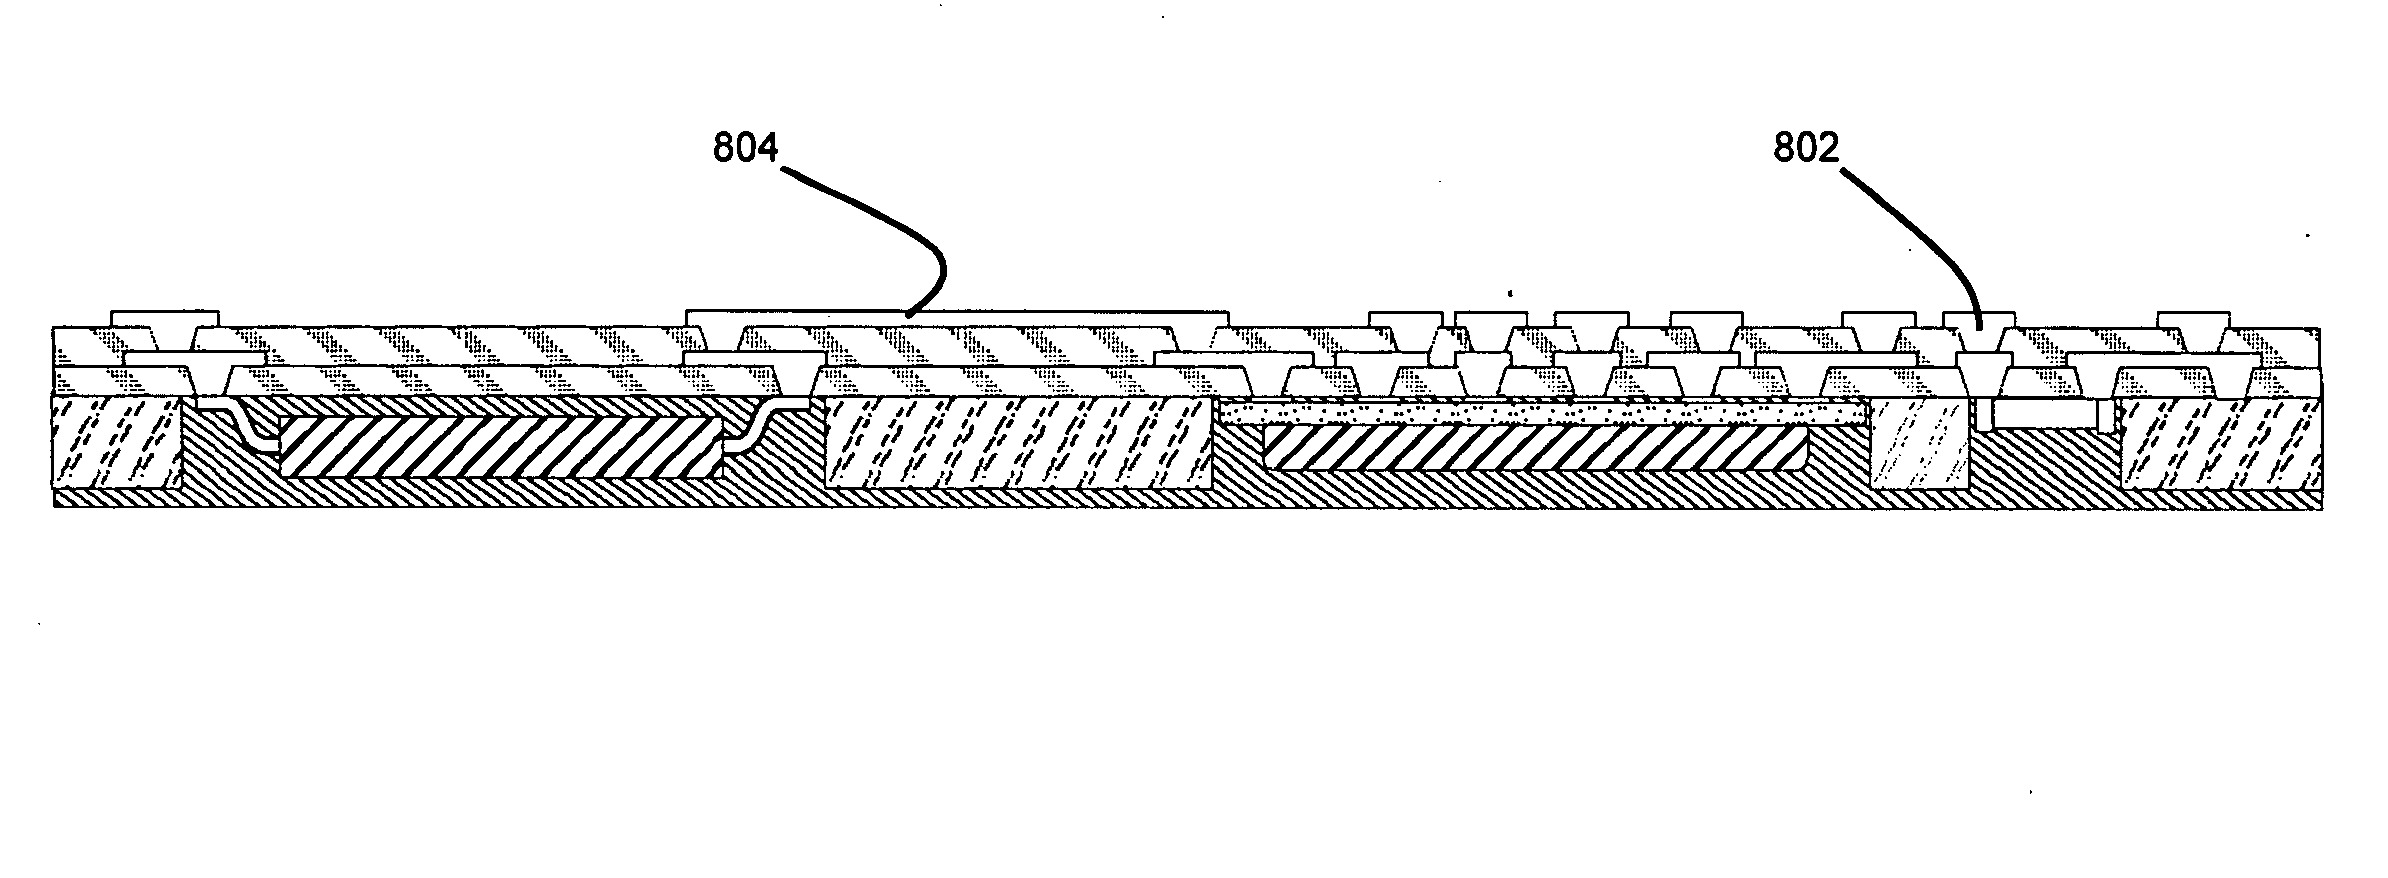 Electronic Assemblies Without Solder and Methods for their Manufacture